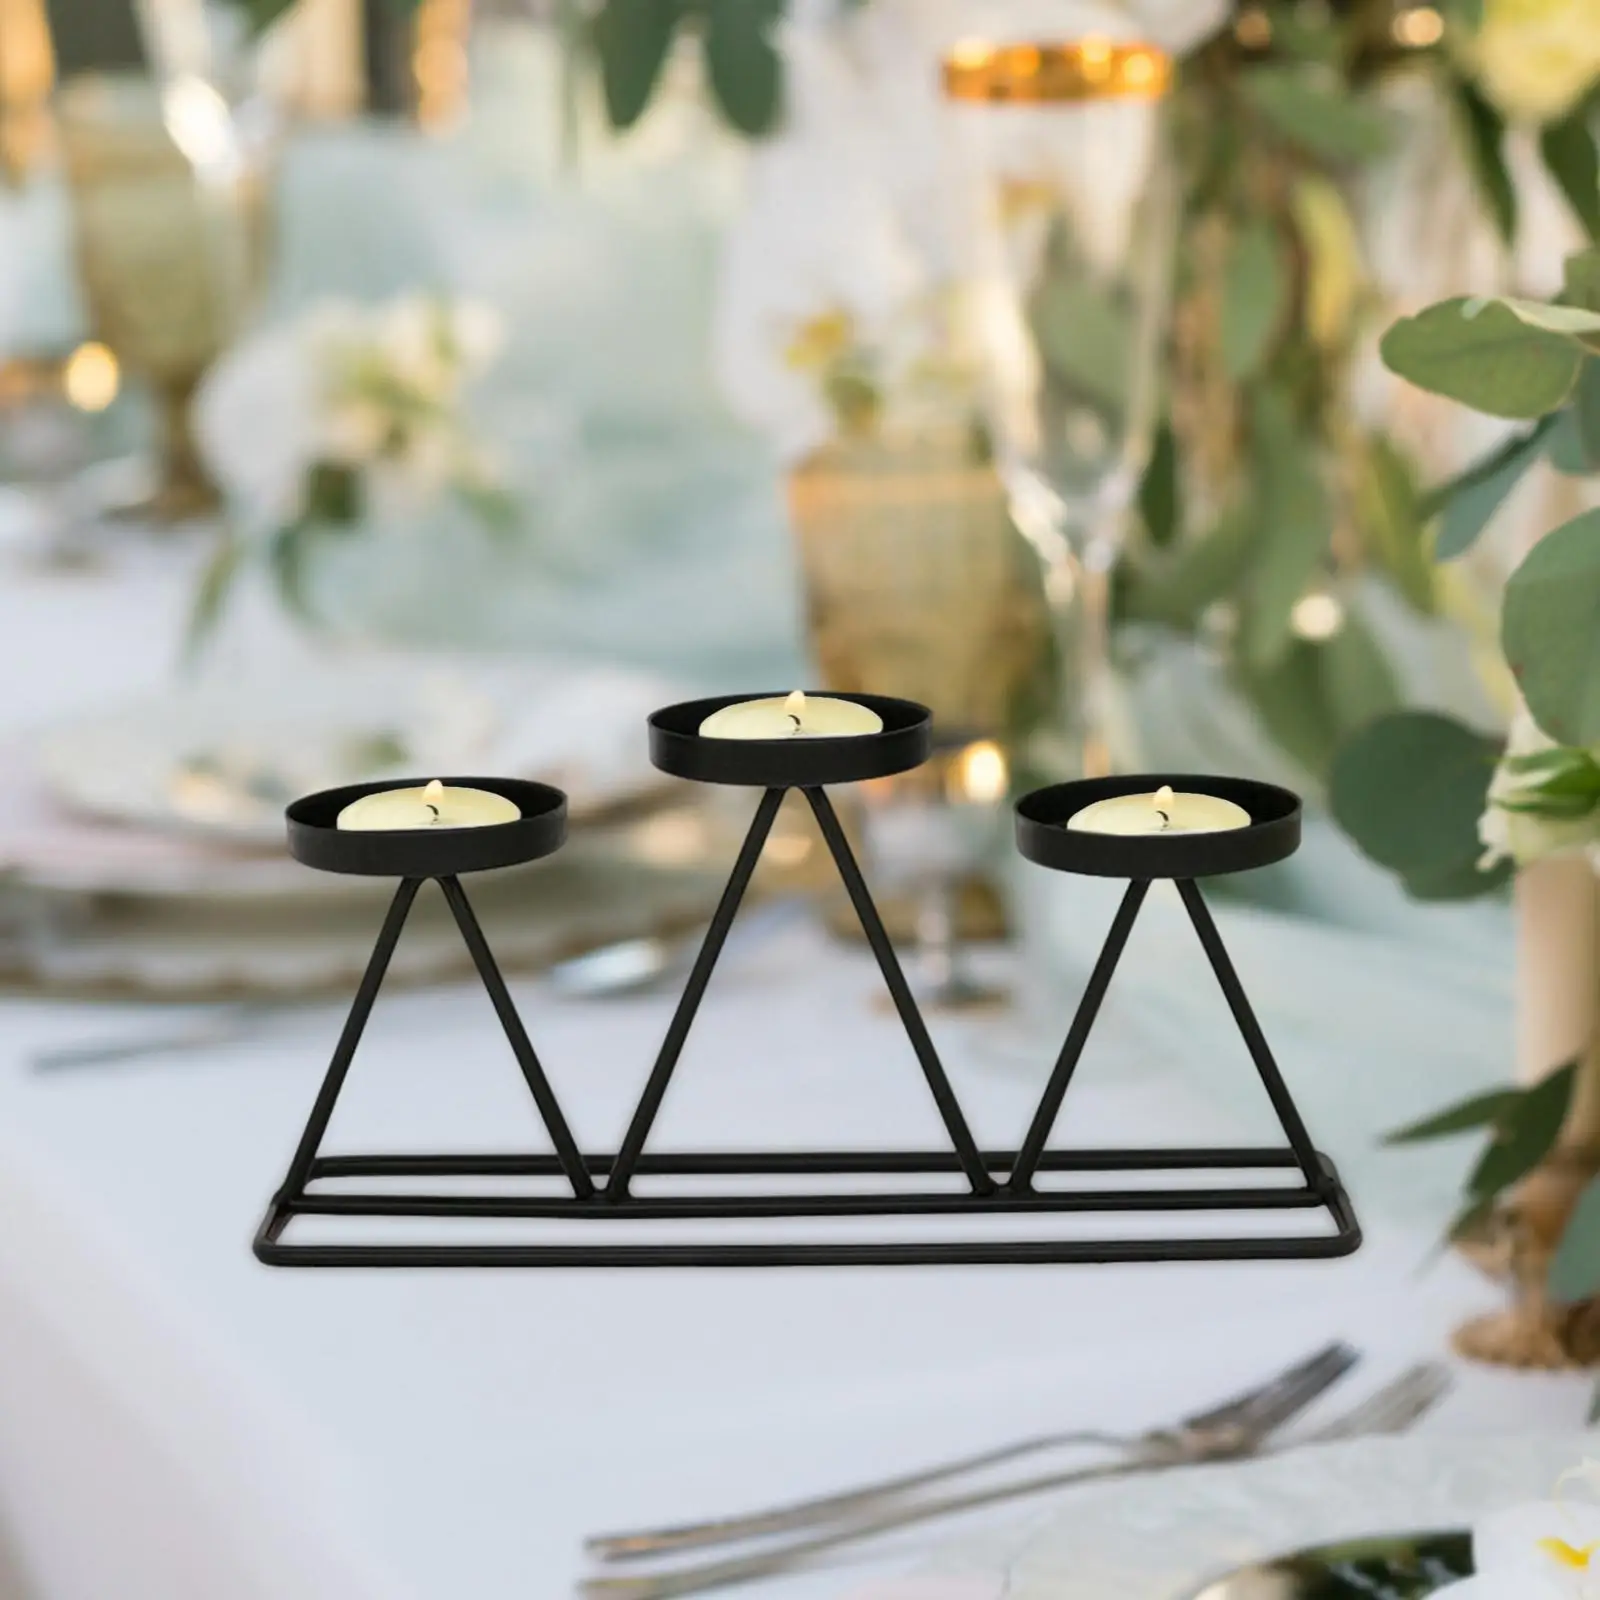 Nordic Candle Holder Tealight Candlestick Table Centerpieces Wedding Party